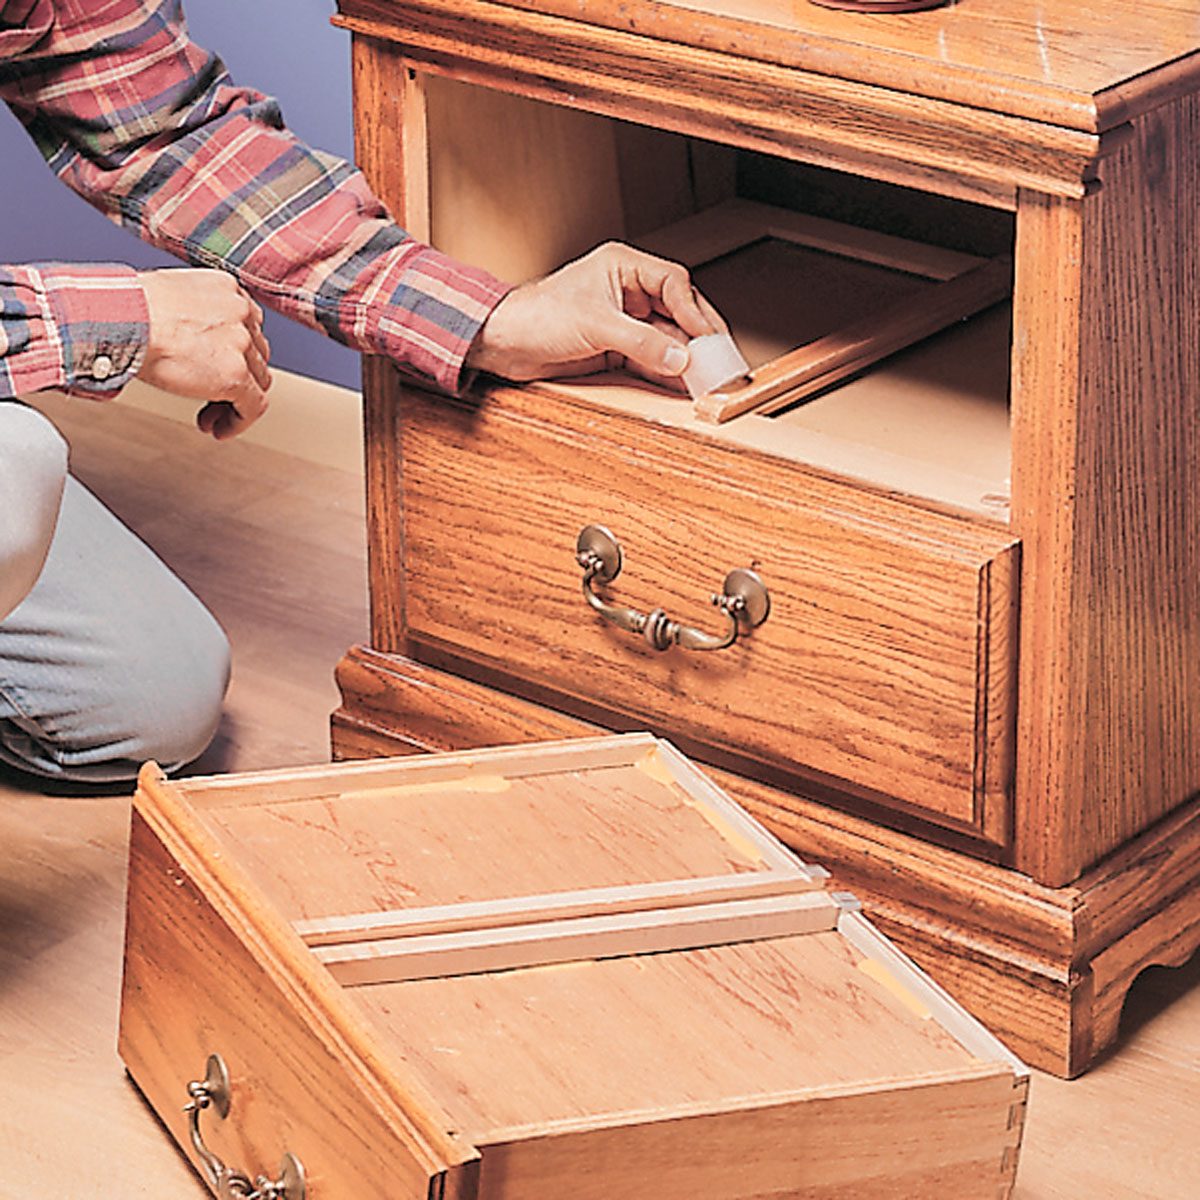 How to Get Wooden Drawers Unstuck